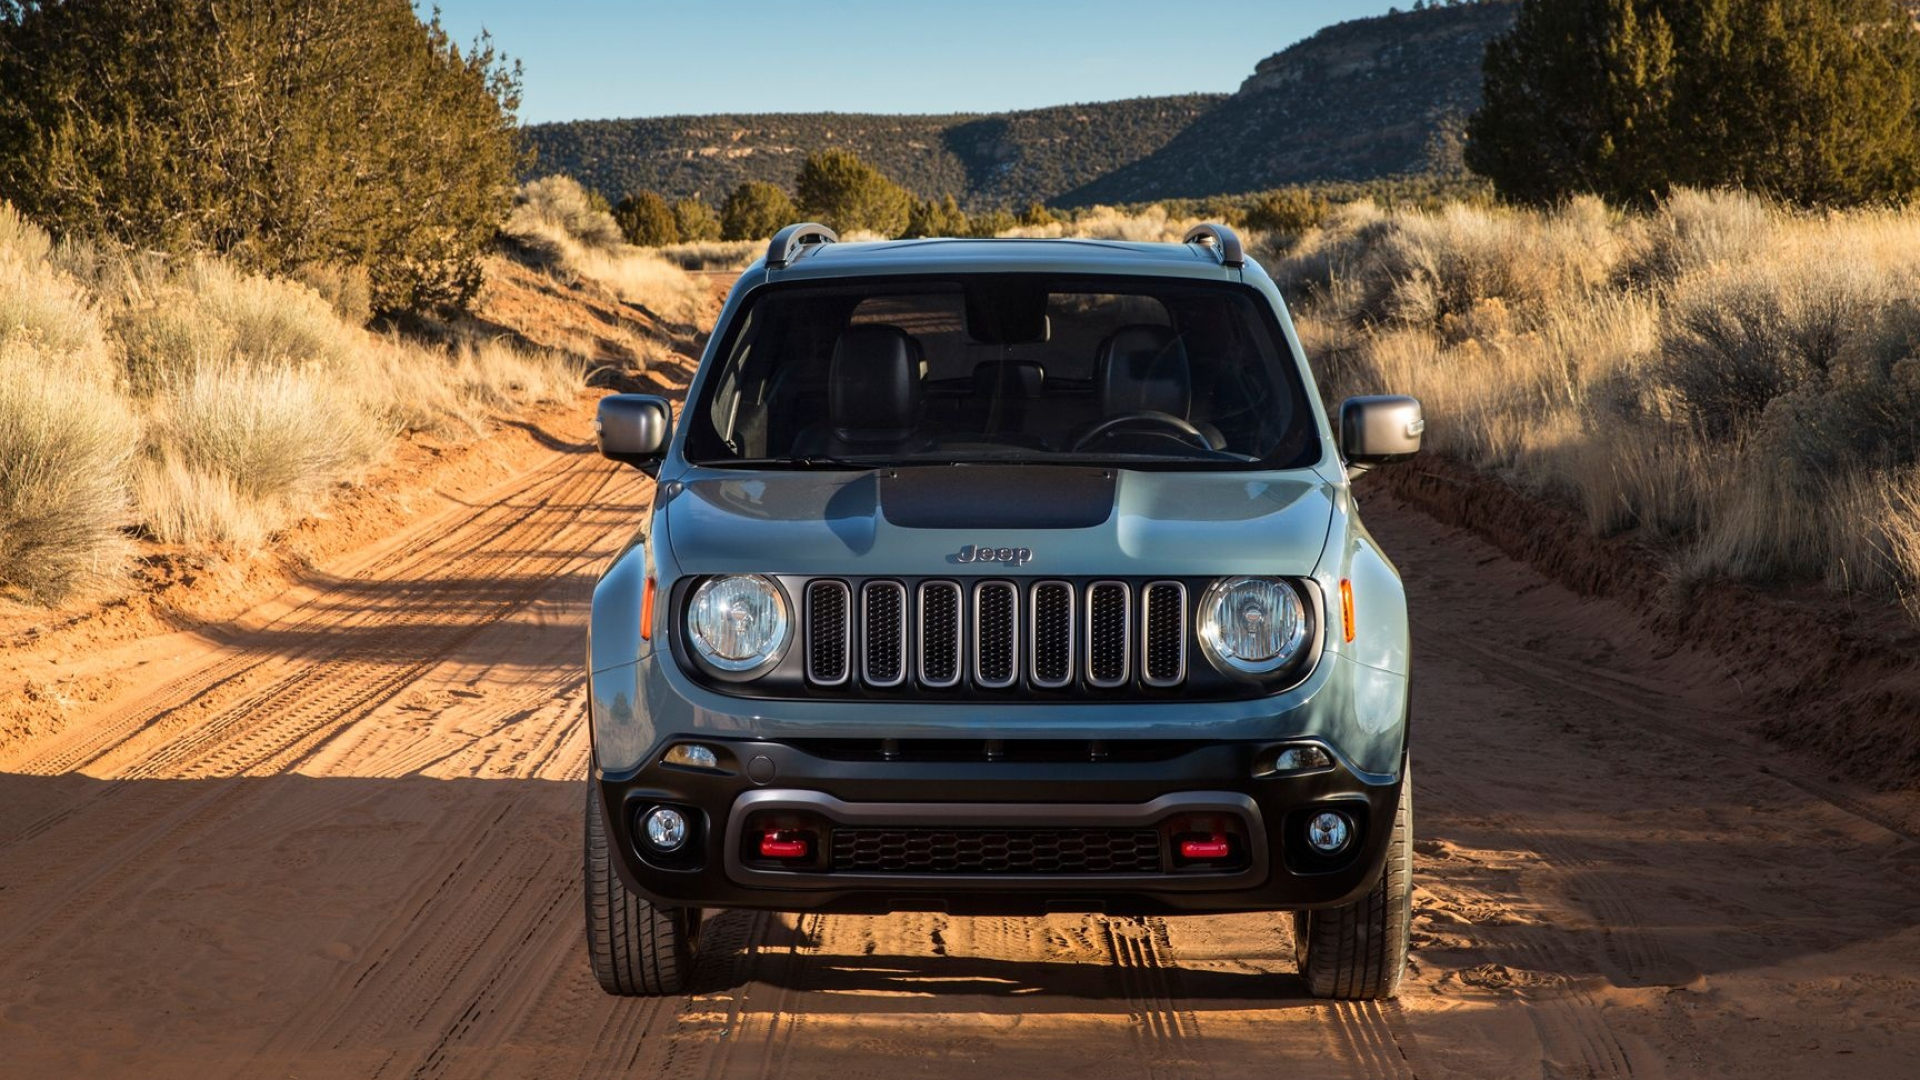 Jeep Renegade, Top backgrounds, Adventure-ready, Off-road capability, 1920x1080 Full HD Desktop